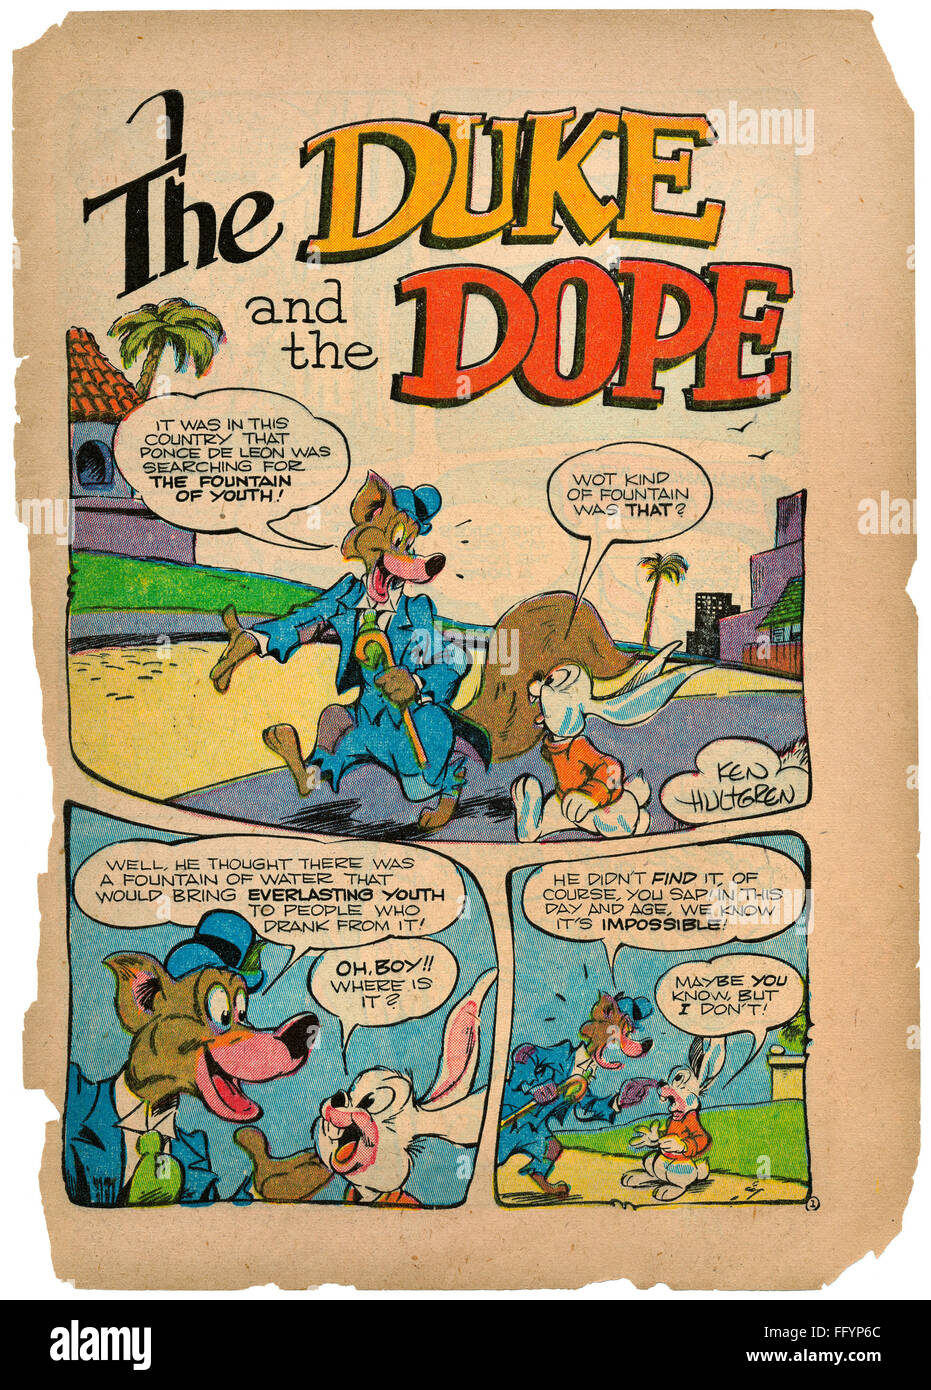 COMIC STRIP, 1948./nFirst page of the comic strip, 'The Duke and the Dope'  by Ken Hultgren, from the October 1948 issue of Giggle Comics Stock Photo -  Alamy